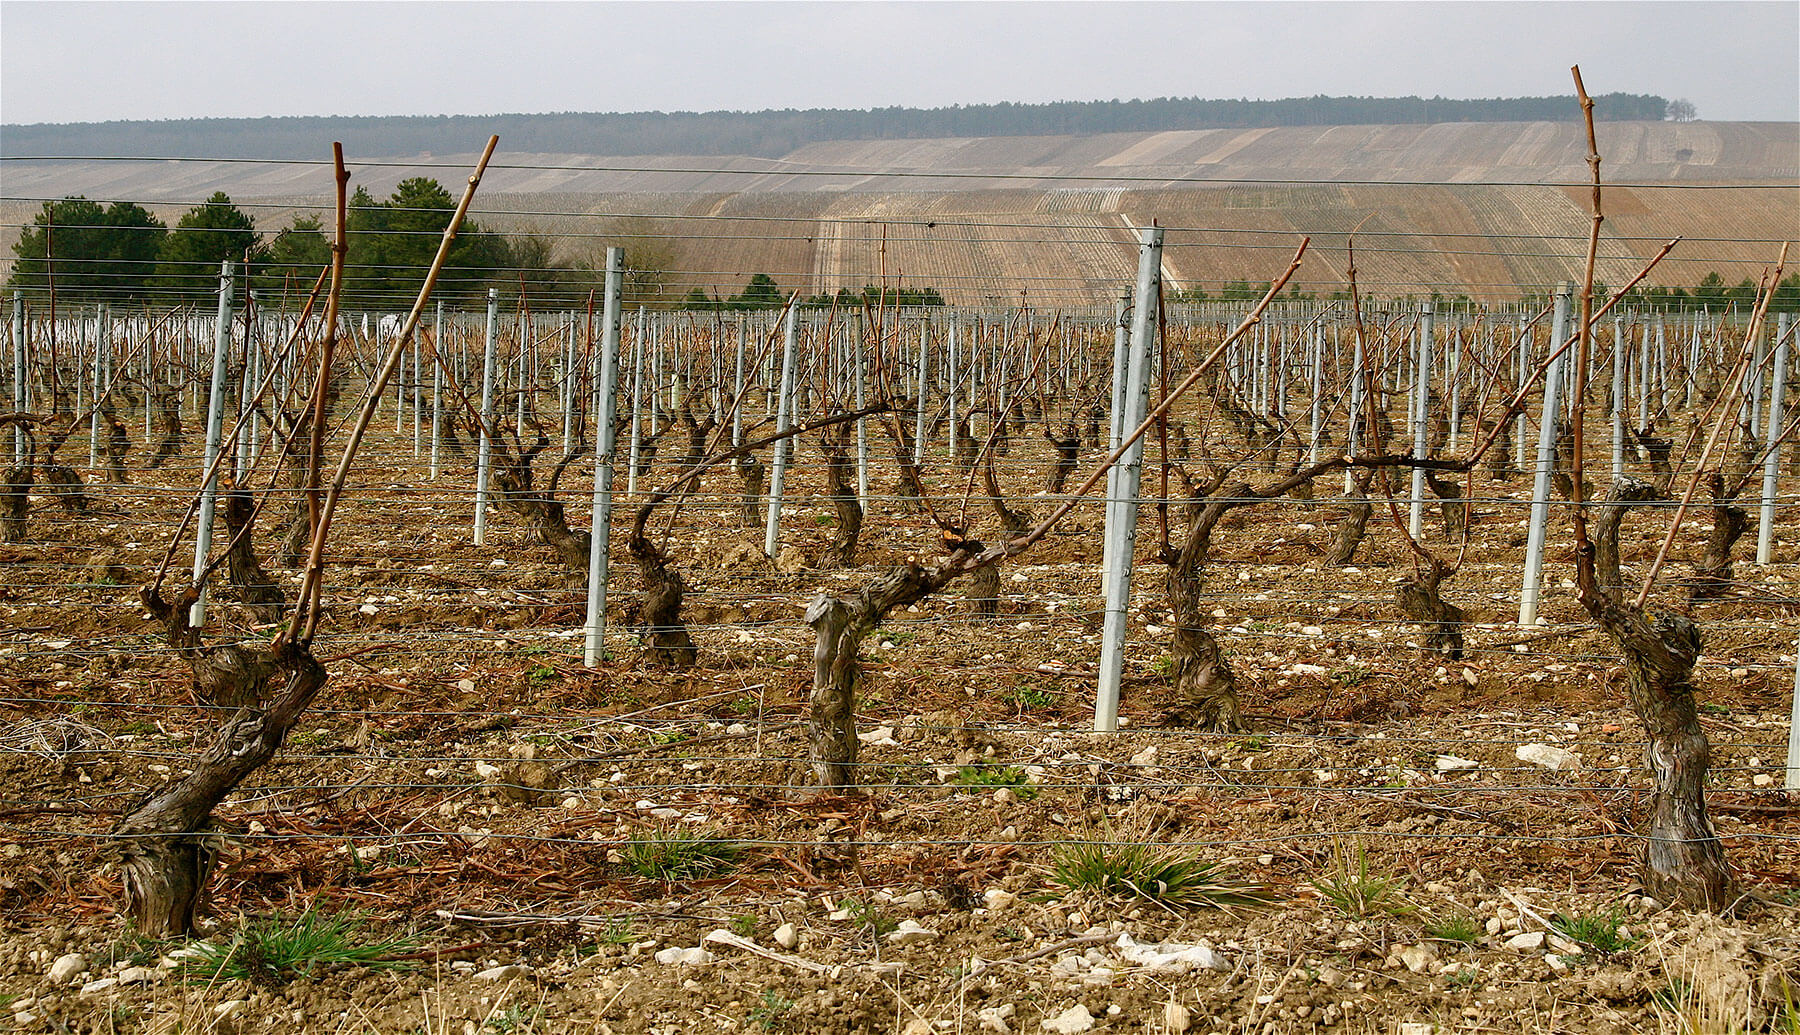 Vineyards near Chateau de Mailly